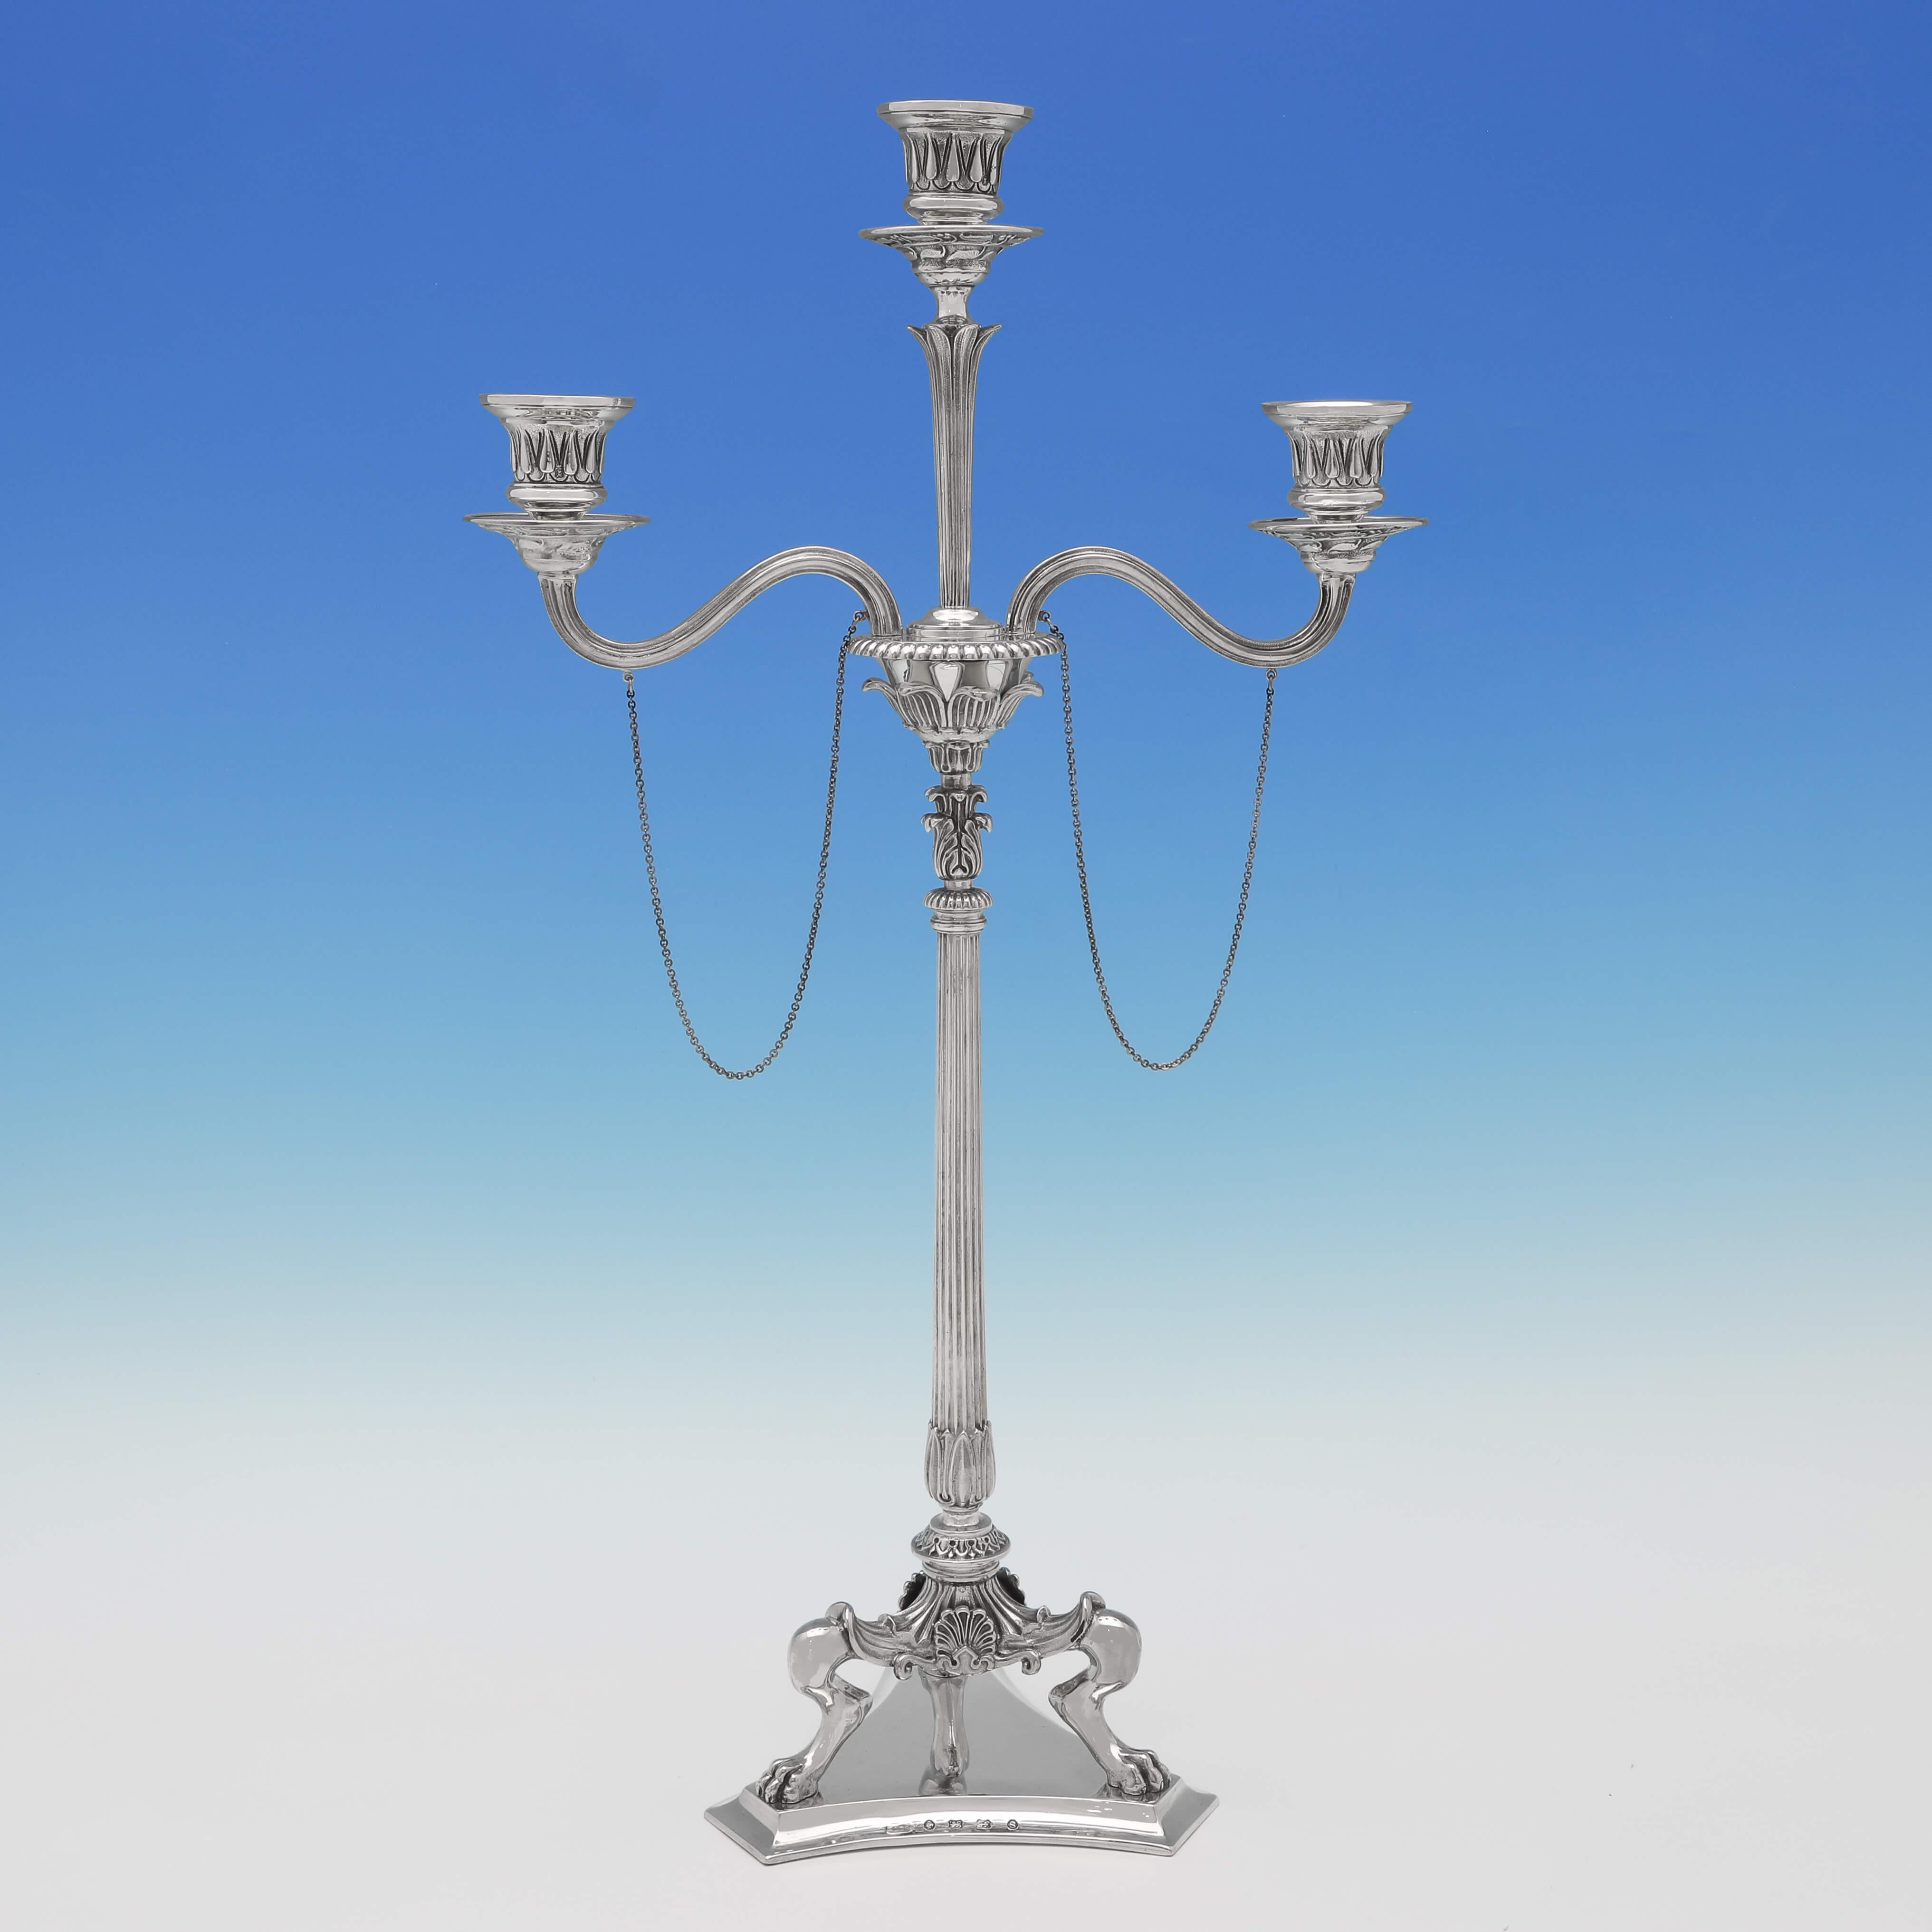 Hallmarked in Birmingham in 1867 by Elkington & Co., this attractive pair of Victorian, antique sterling silver candelabra, are in the Neoclassical Revival style, and hold three candles. Each candelabrum measures 20.25